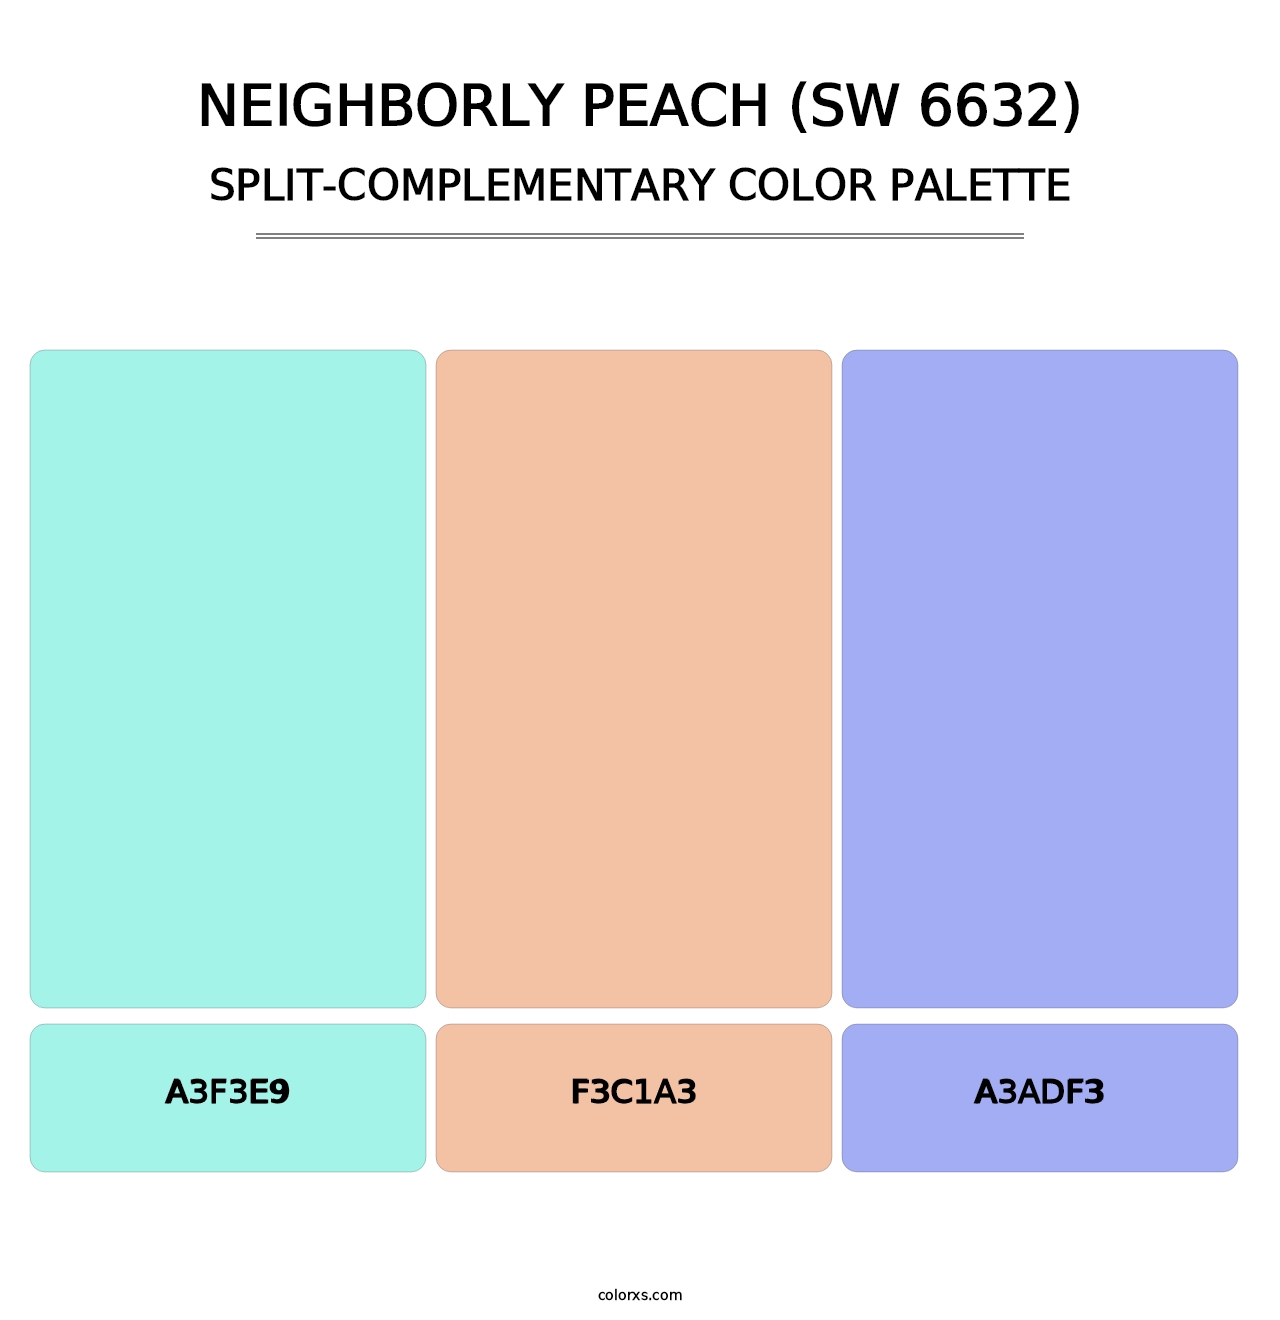 Neighborly Peach (SW 6632) - Split-Complementary Color Palette